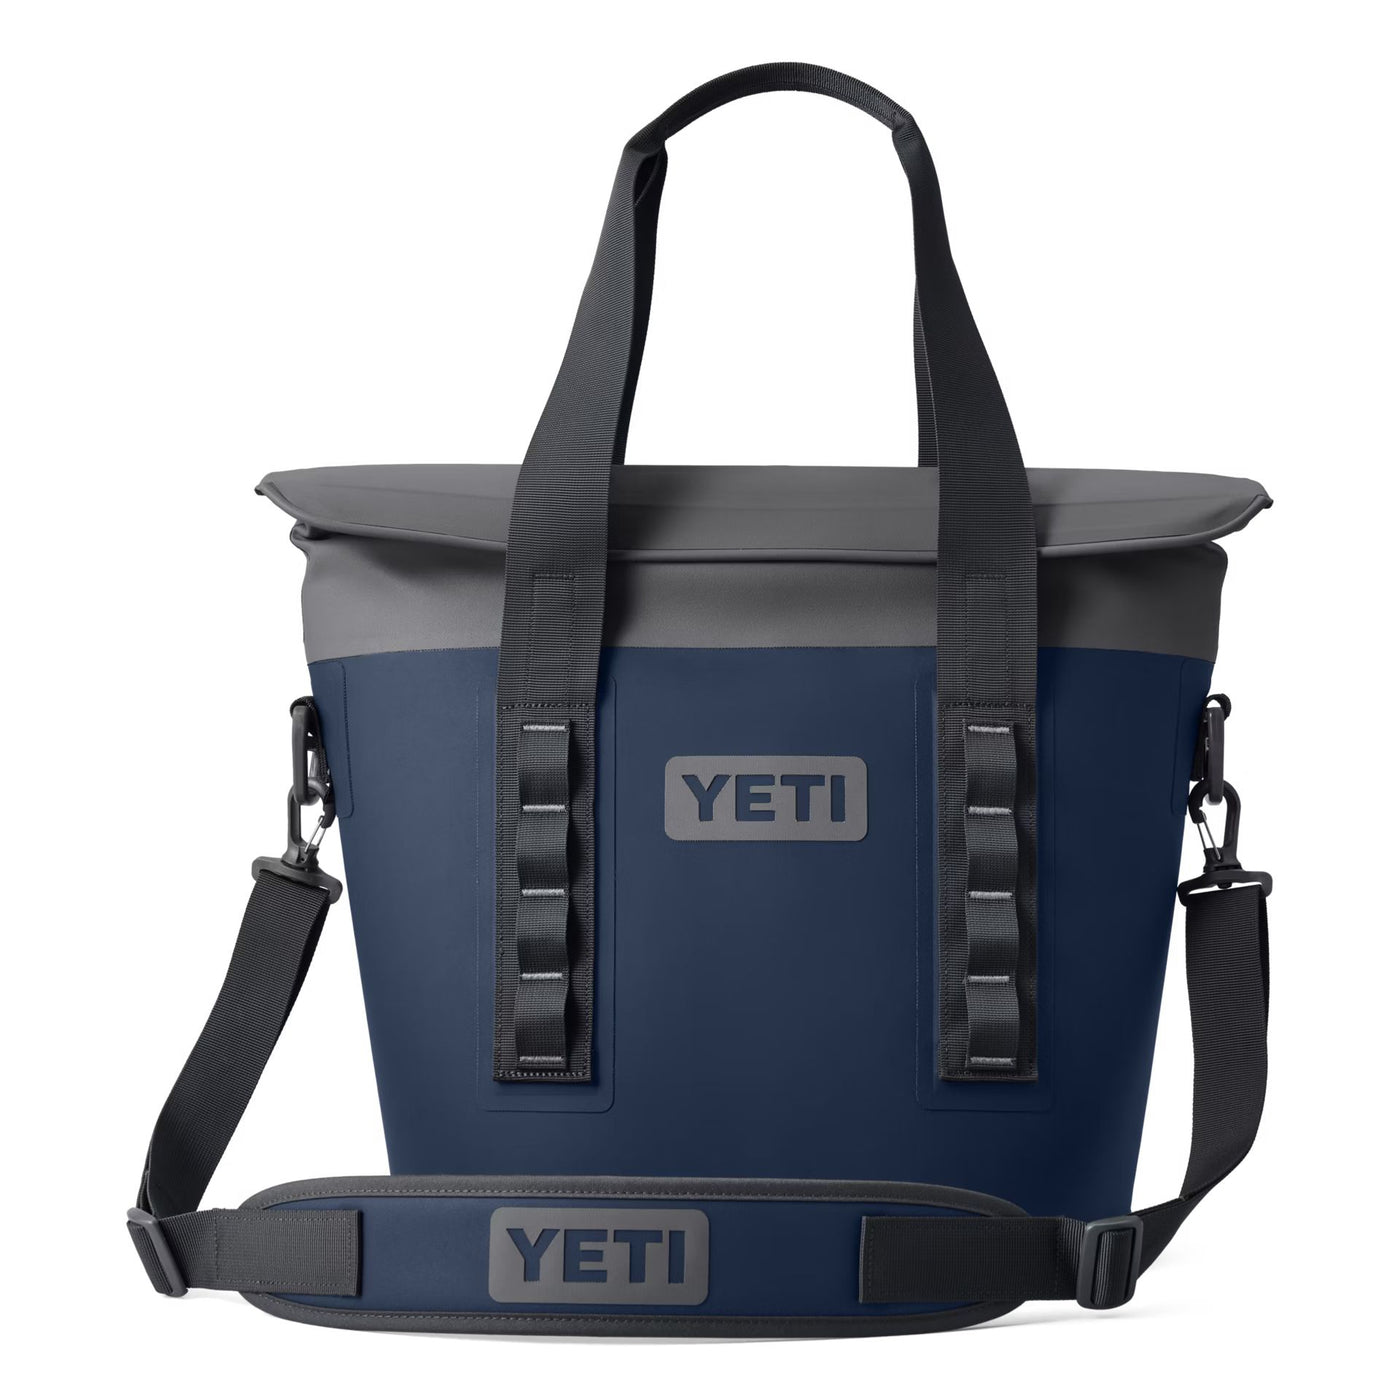 Yeti Hopper M15 Soft Cooler-Hunting/Outdoors-NAVY-Kevin's Fine Outdoor Gear & Apparel